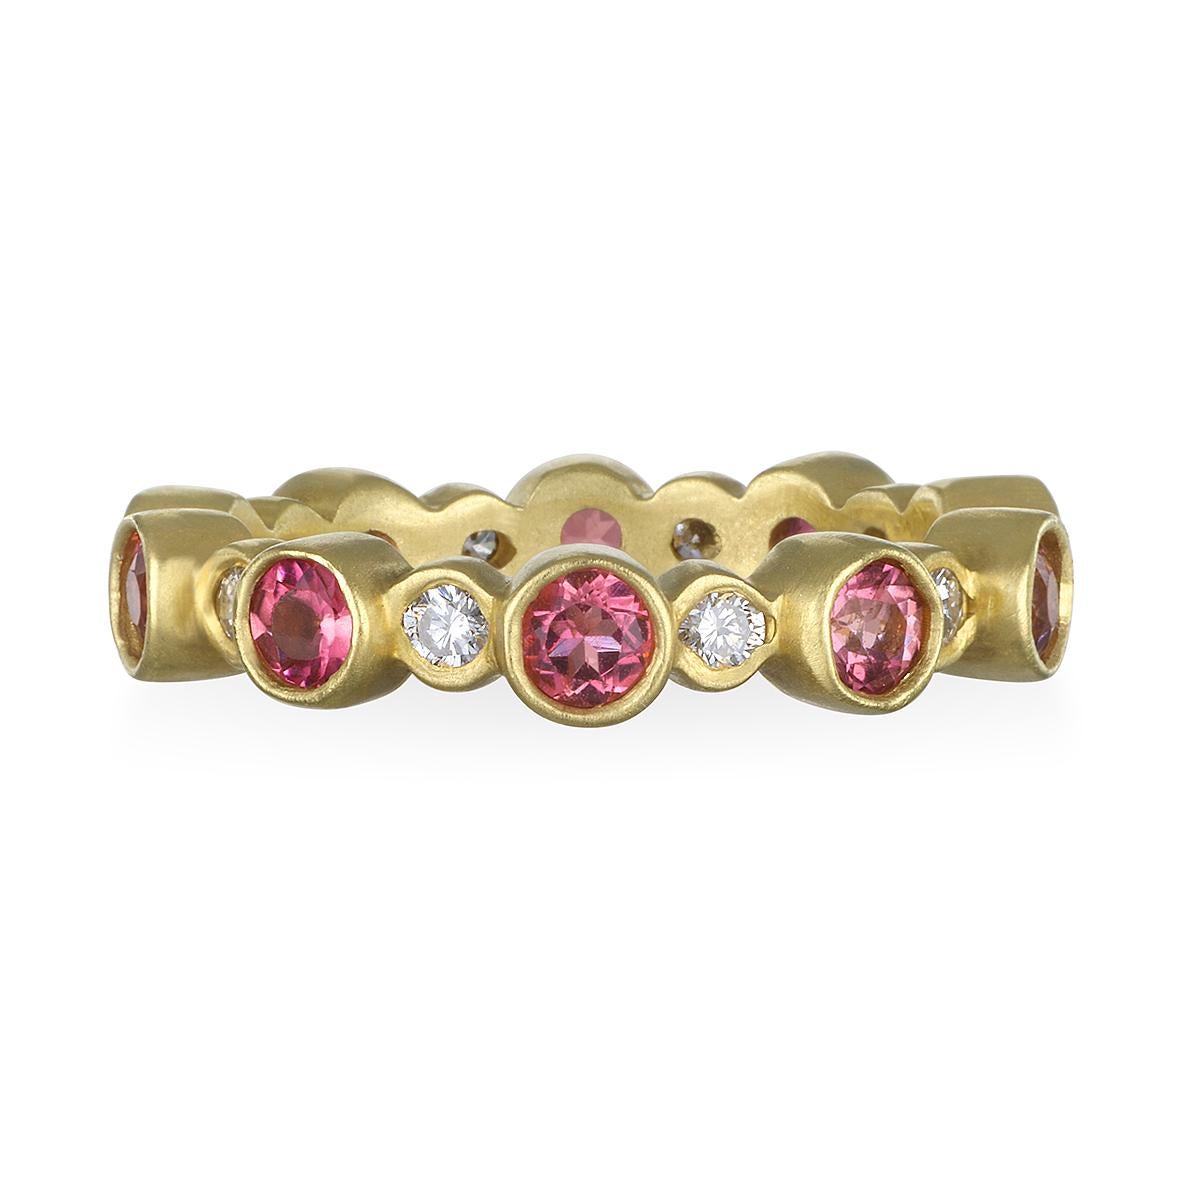 Great for stacking!
Alternating bezel ring with diamonds and green tourmaline. Set in 18k gold with a matte finish, this ring can be worn alone or stacked with other diamond and colored stone bands to create your own unique style. 
Diamonds:  .42